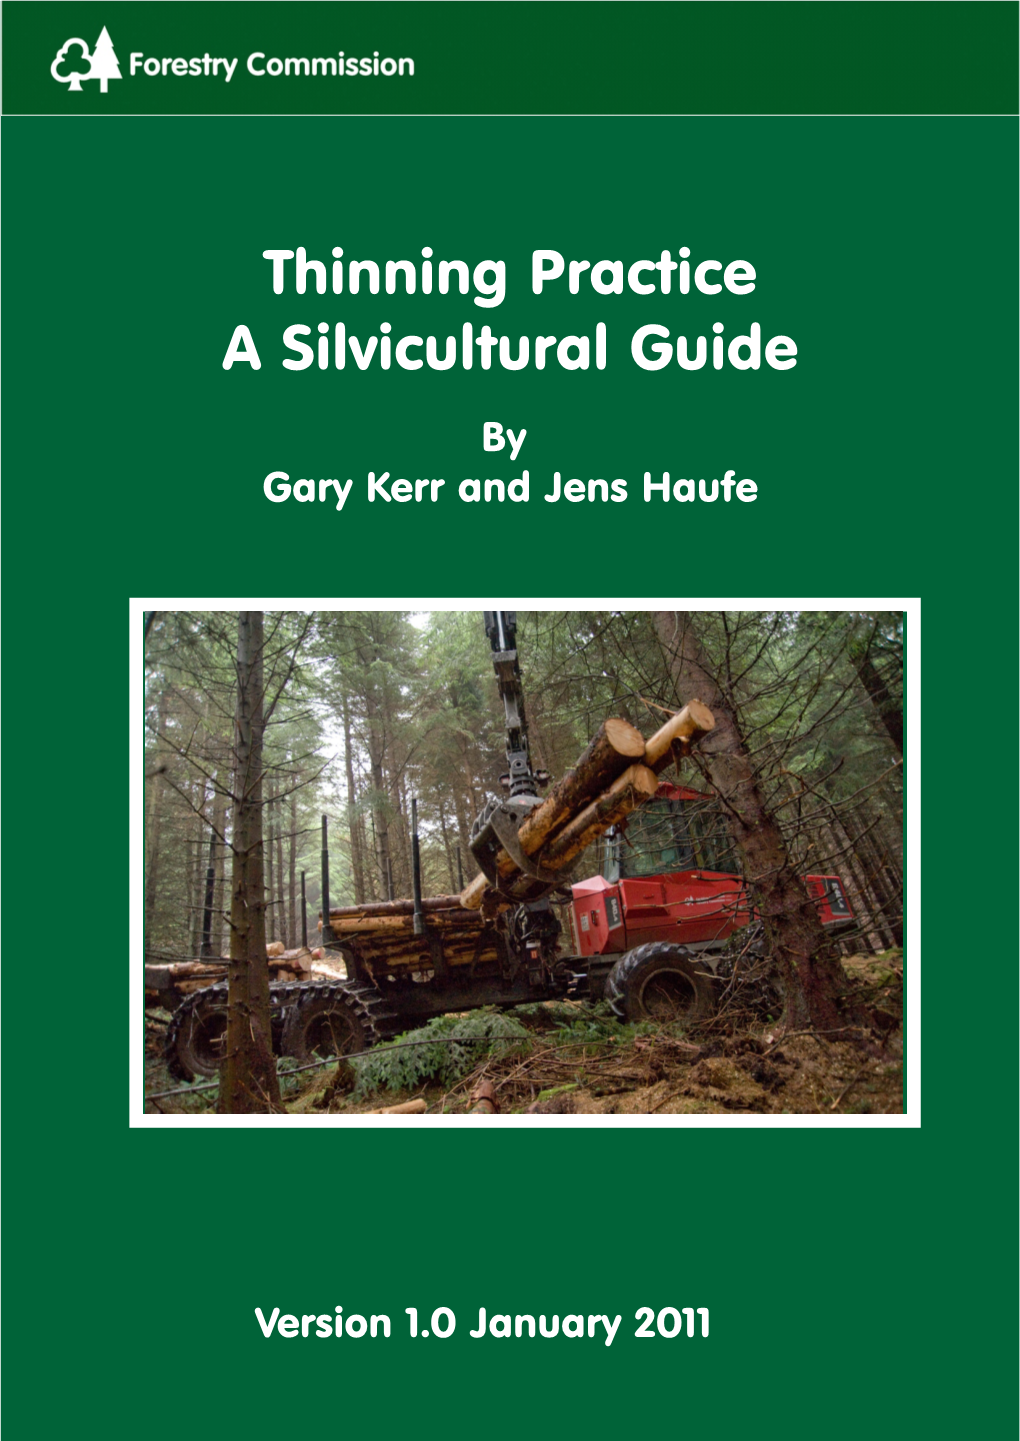 Thinning Practice a Silvicultural Guide by Gary Kerr and Jens Haufe